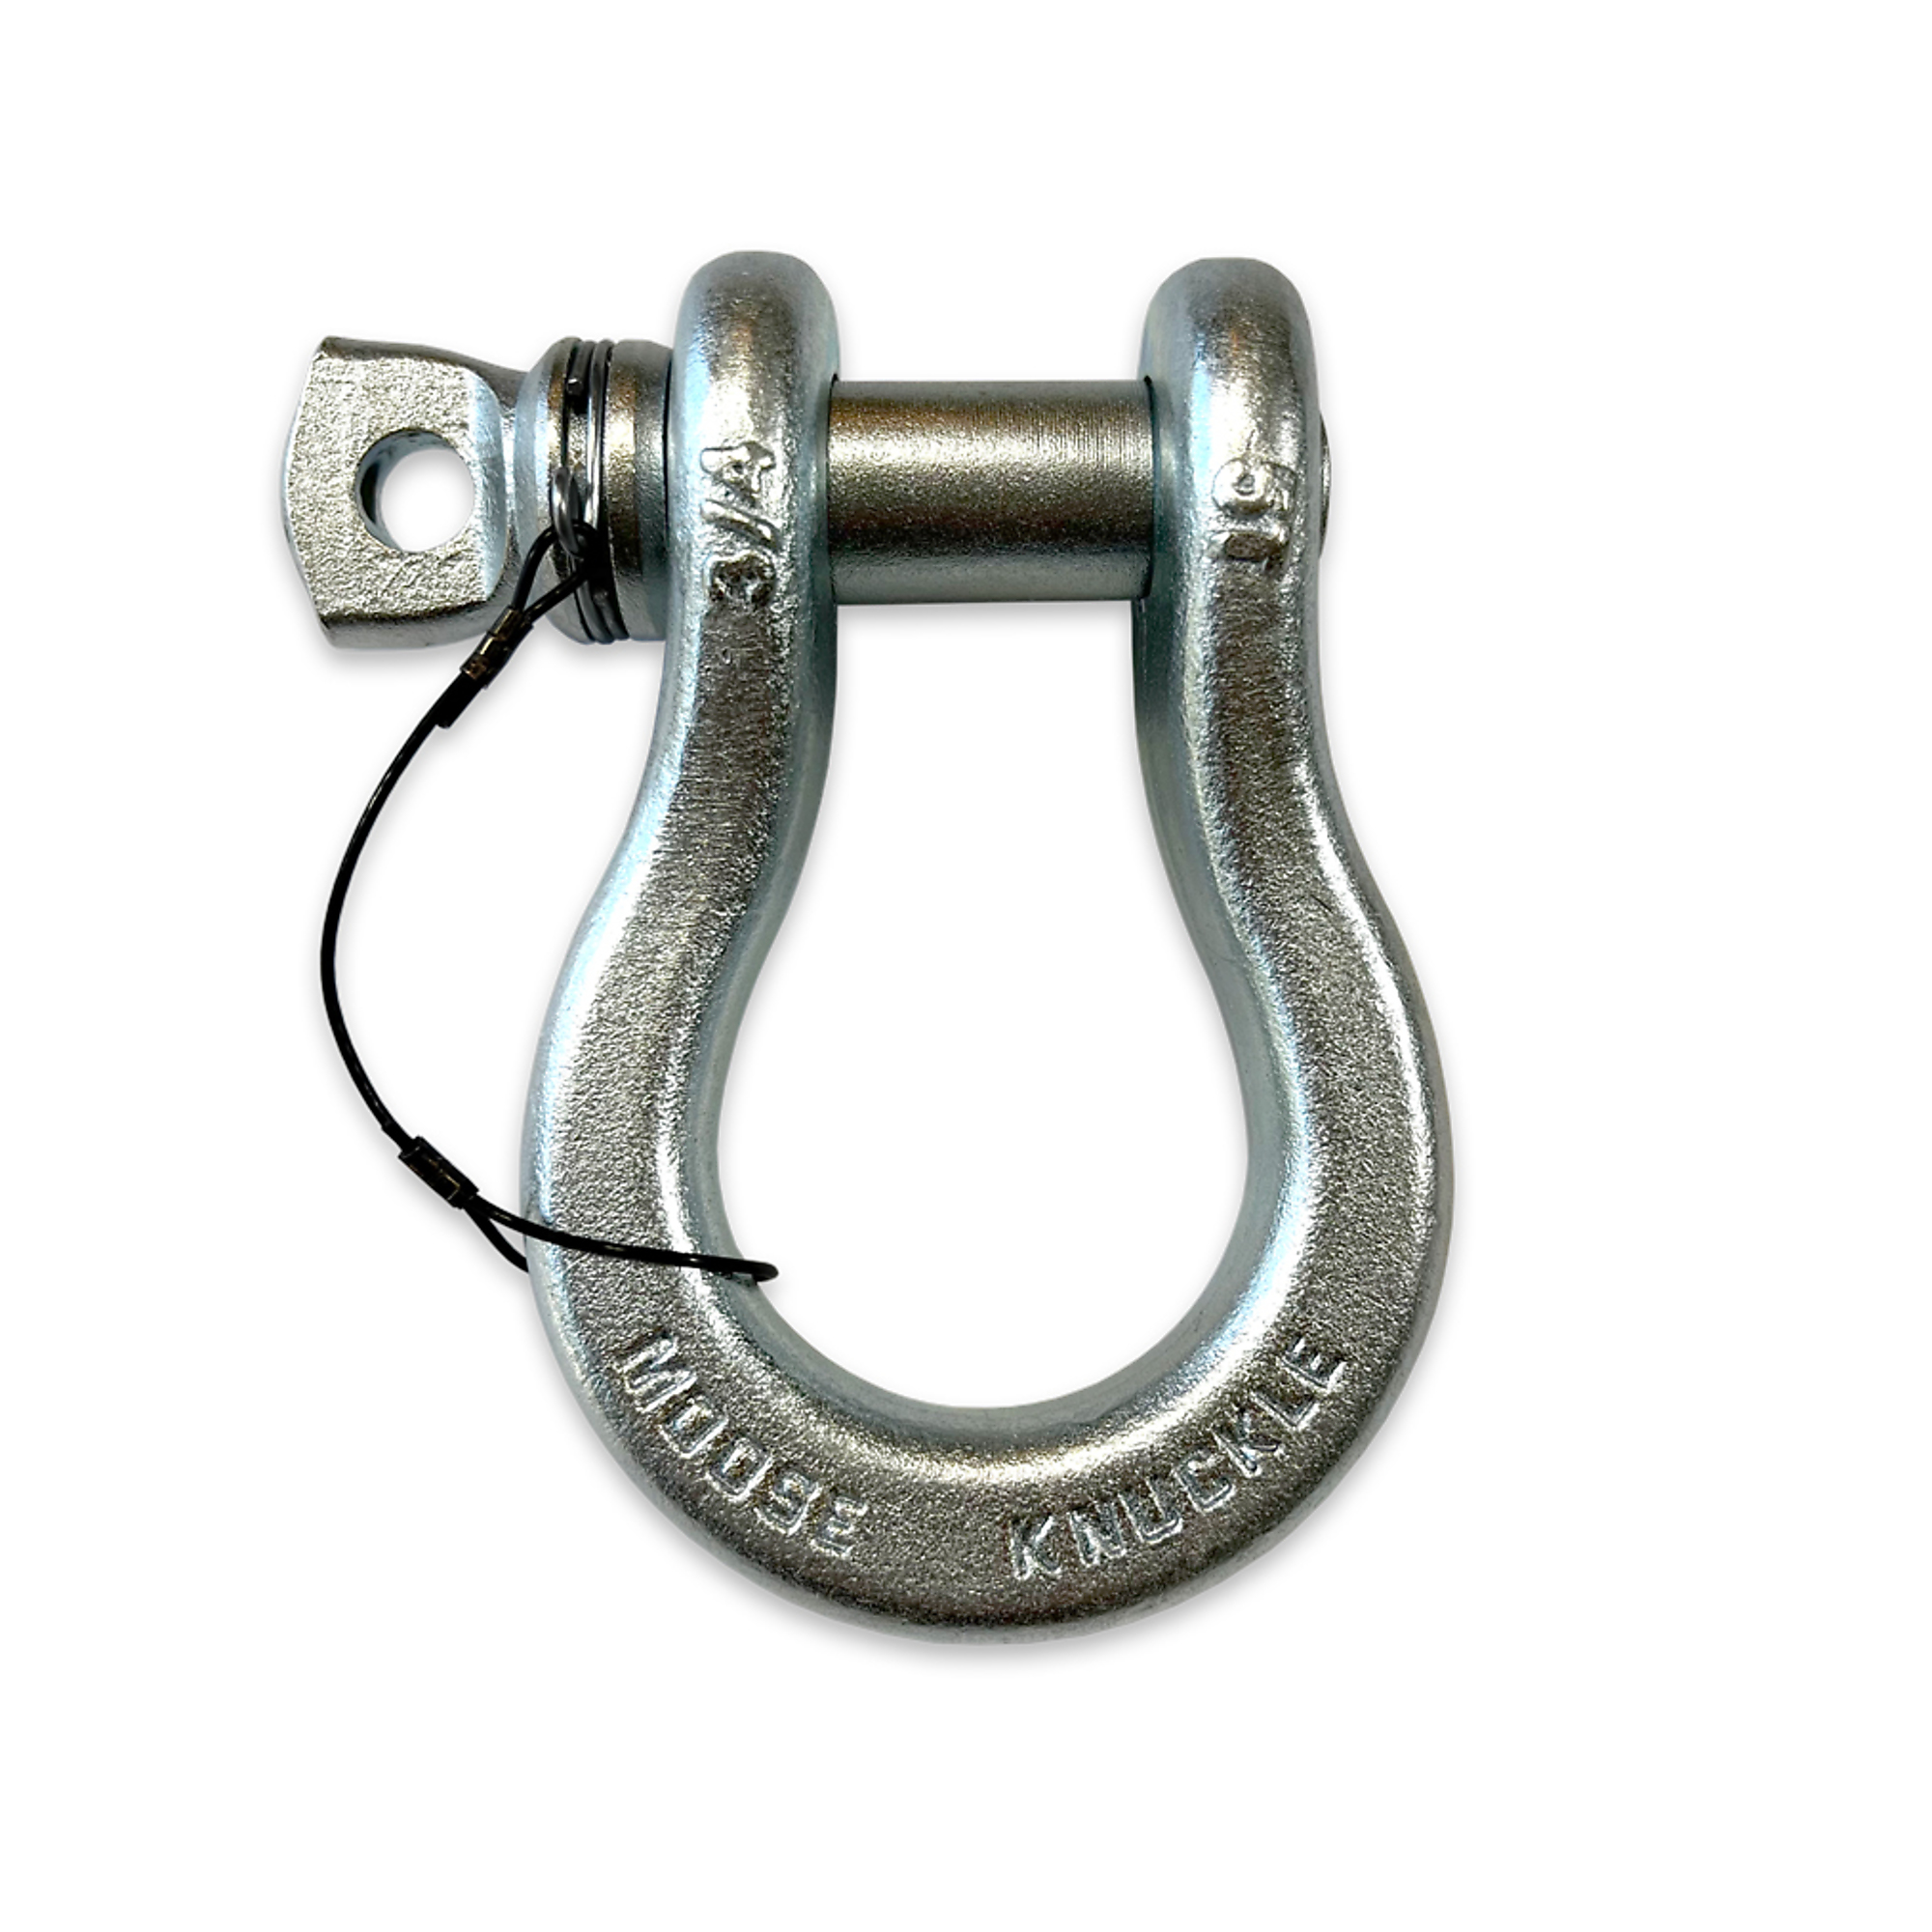 Moose Knuckle Offroad, Nice Gal Recovery Towing Lanyard Spin Pin 3/4 Shackle, Working Load Limit 10000 lb, Model FN000023-011